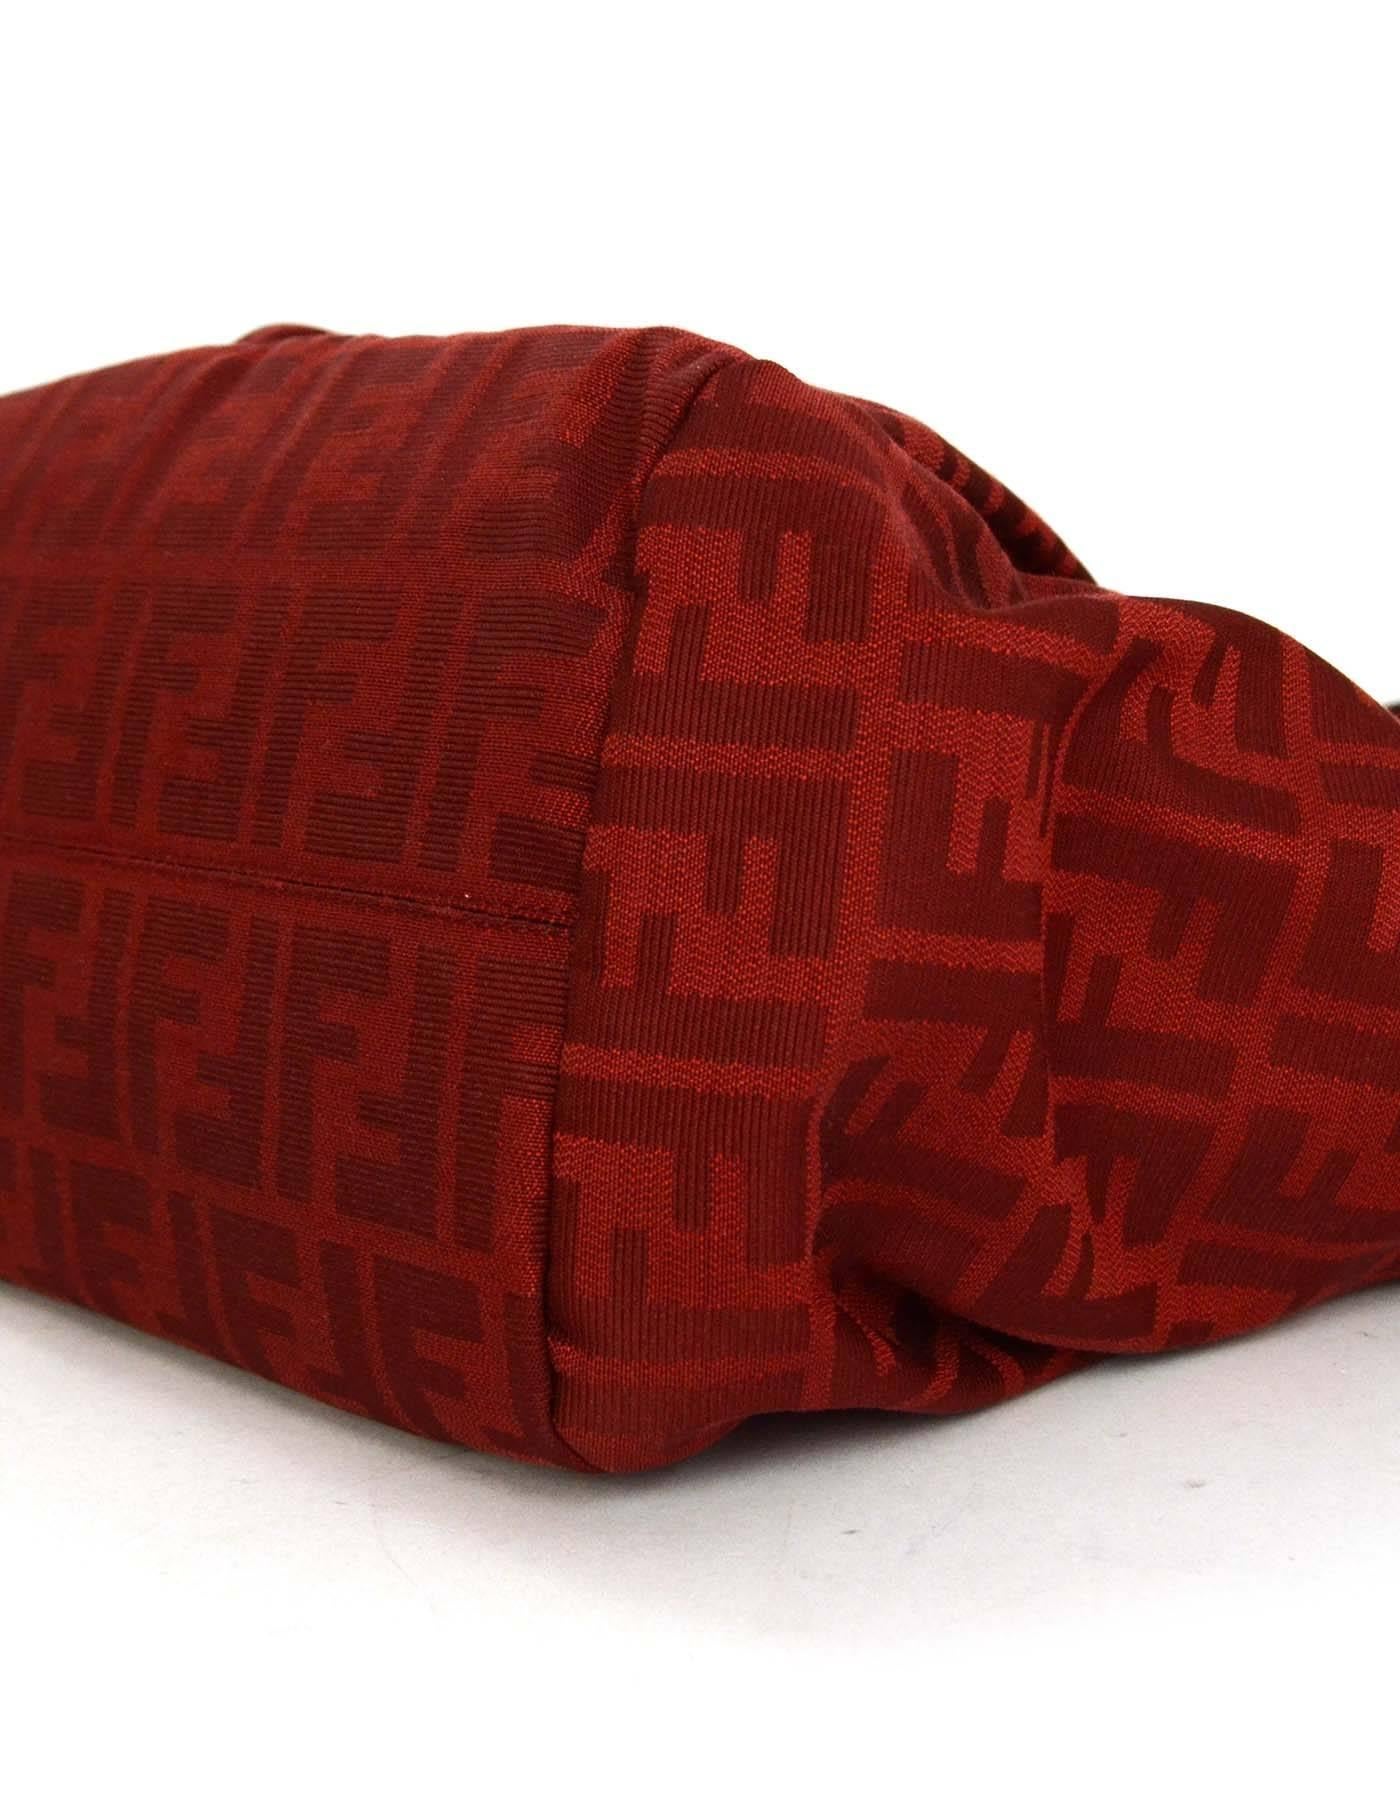 Fendi Red Leather & Zucca Print Canvas Bag GHW 1